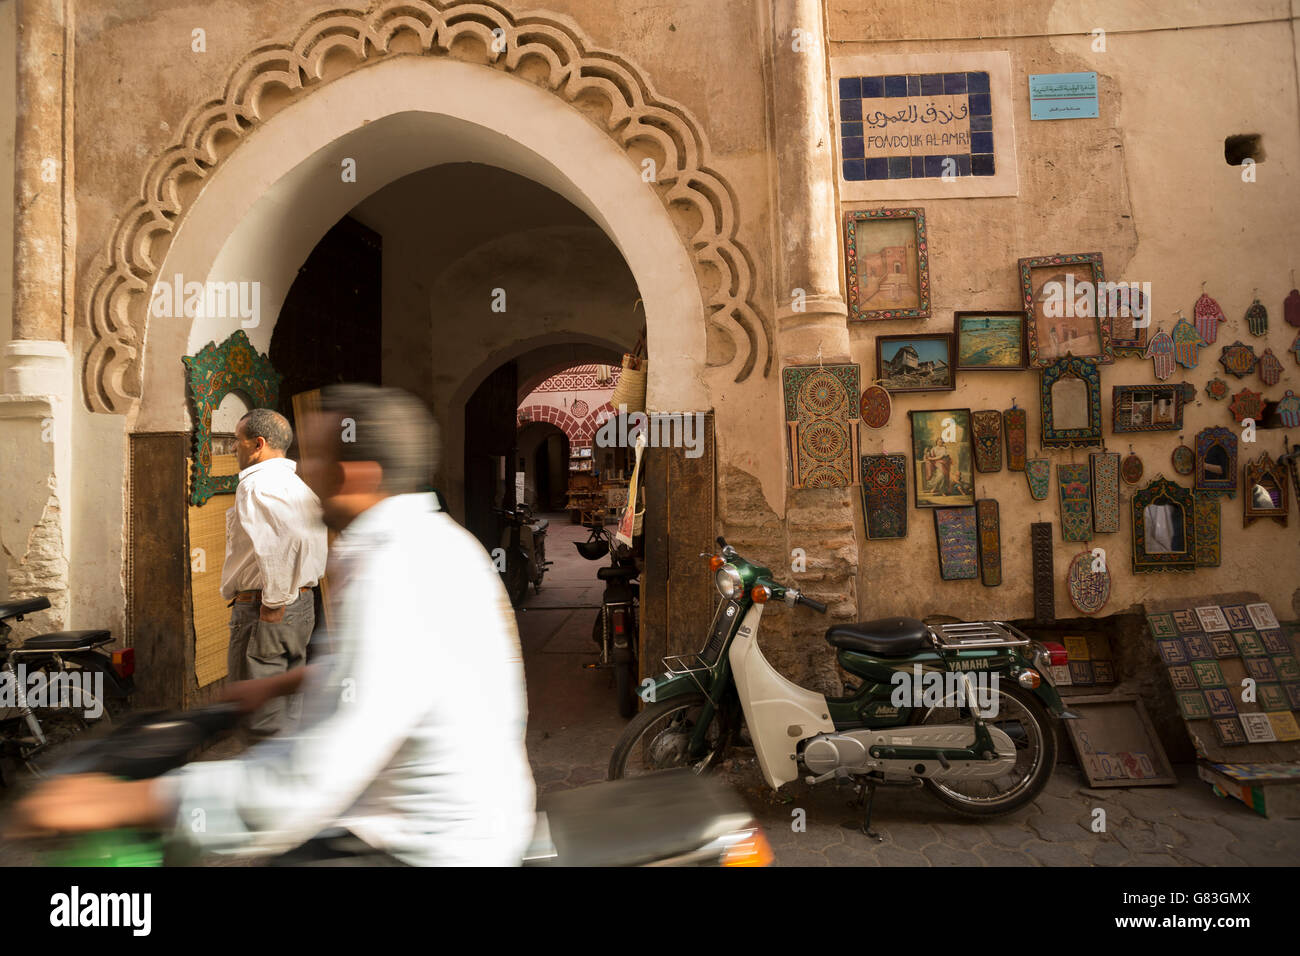 Local residents and tourists dash through the narrow streets of the Marrakesh Medina, Morocco. Stock Photo